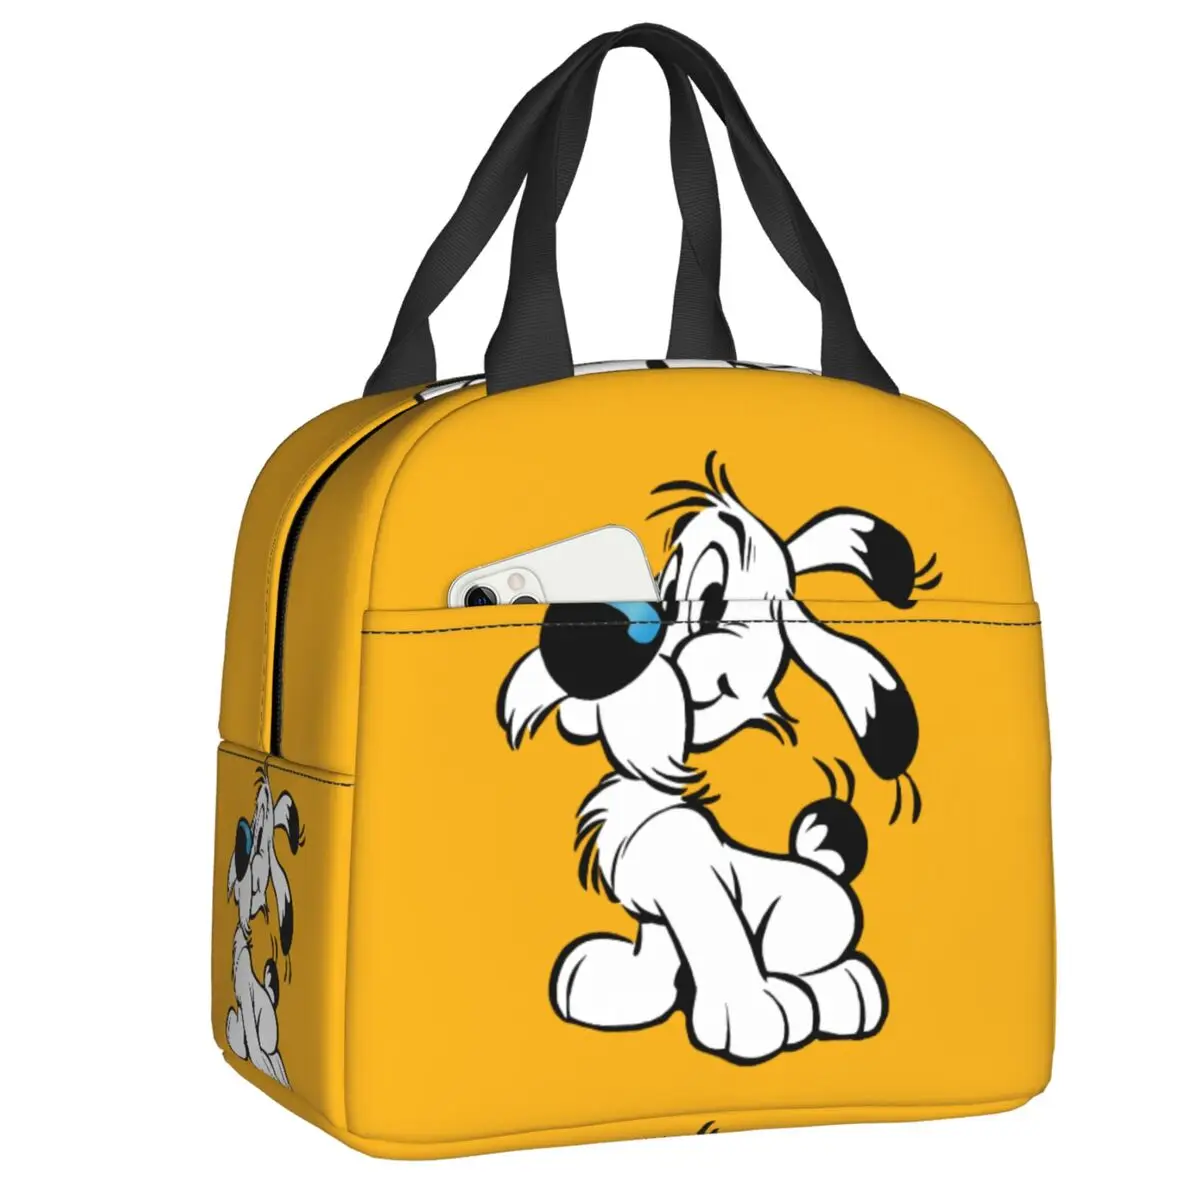 Anime Asterix And Obelix Dogmatix Lunch Box Women Warm Cooler Insulated Lunch Bag for Kids School Children Food Picnic Tote Bags